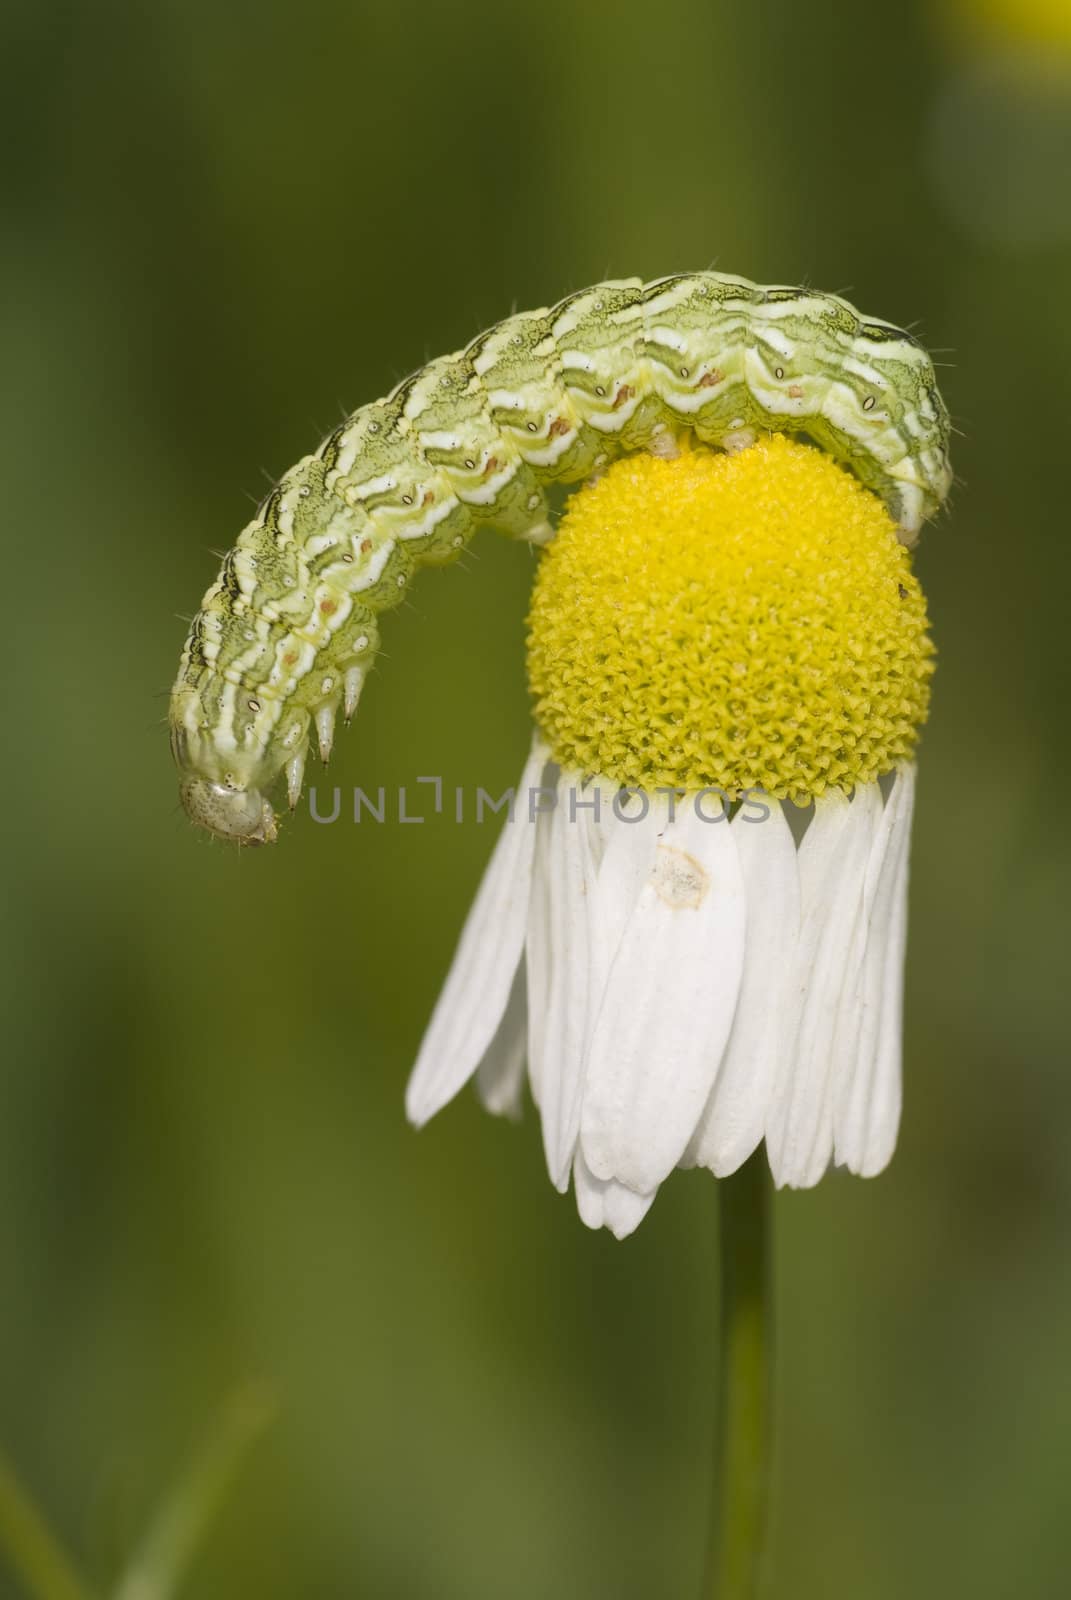 caterpillar green striped hangs on flower camomile